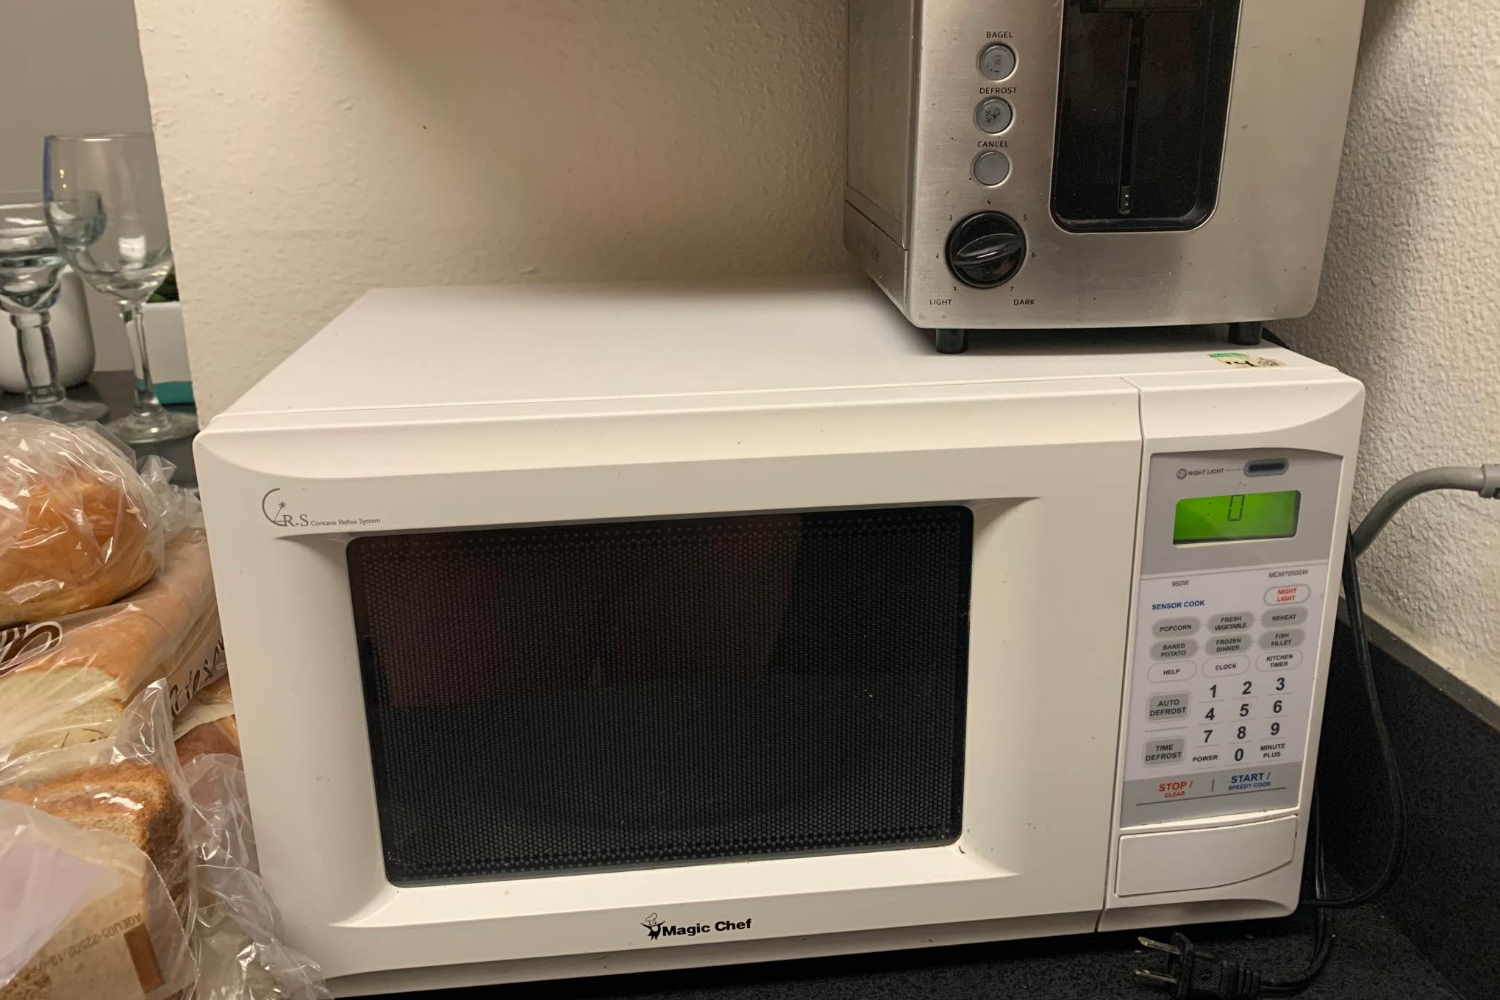 Why is microwave tripping breaker